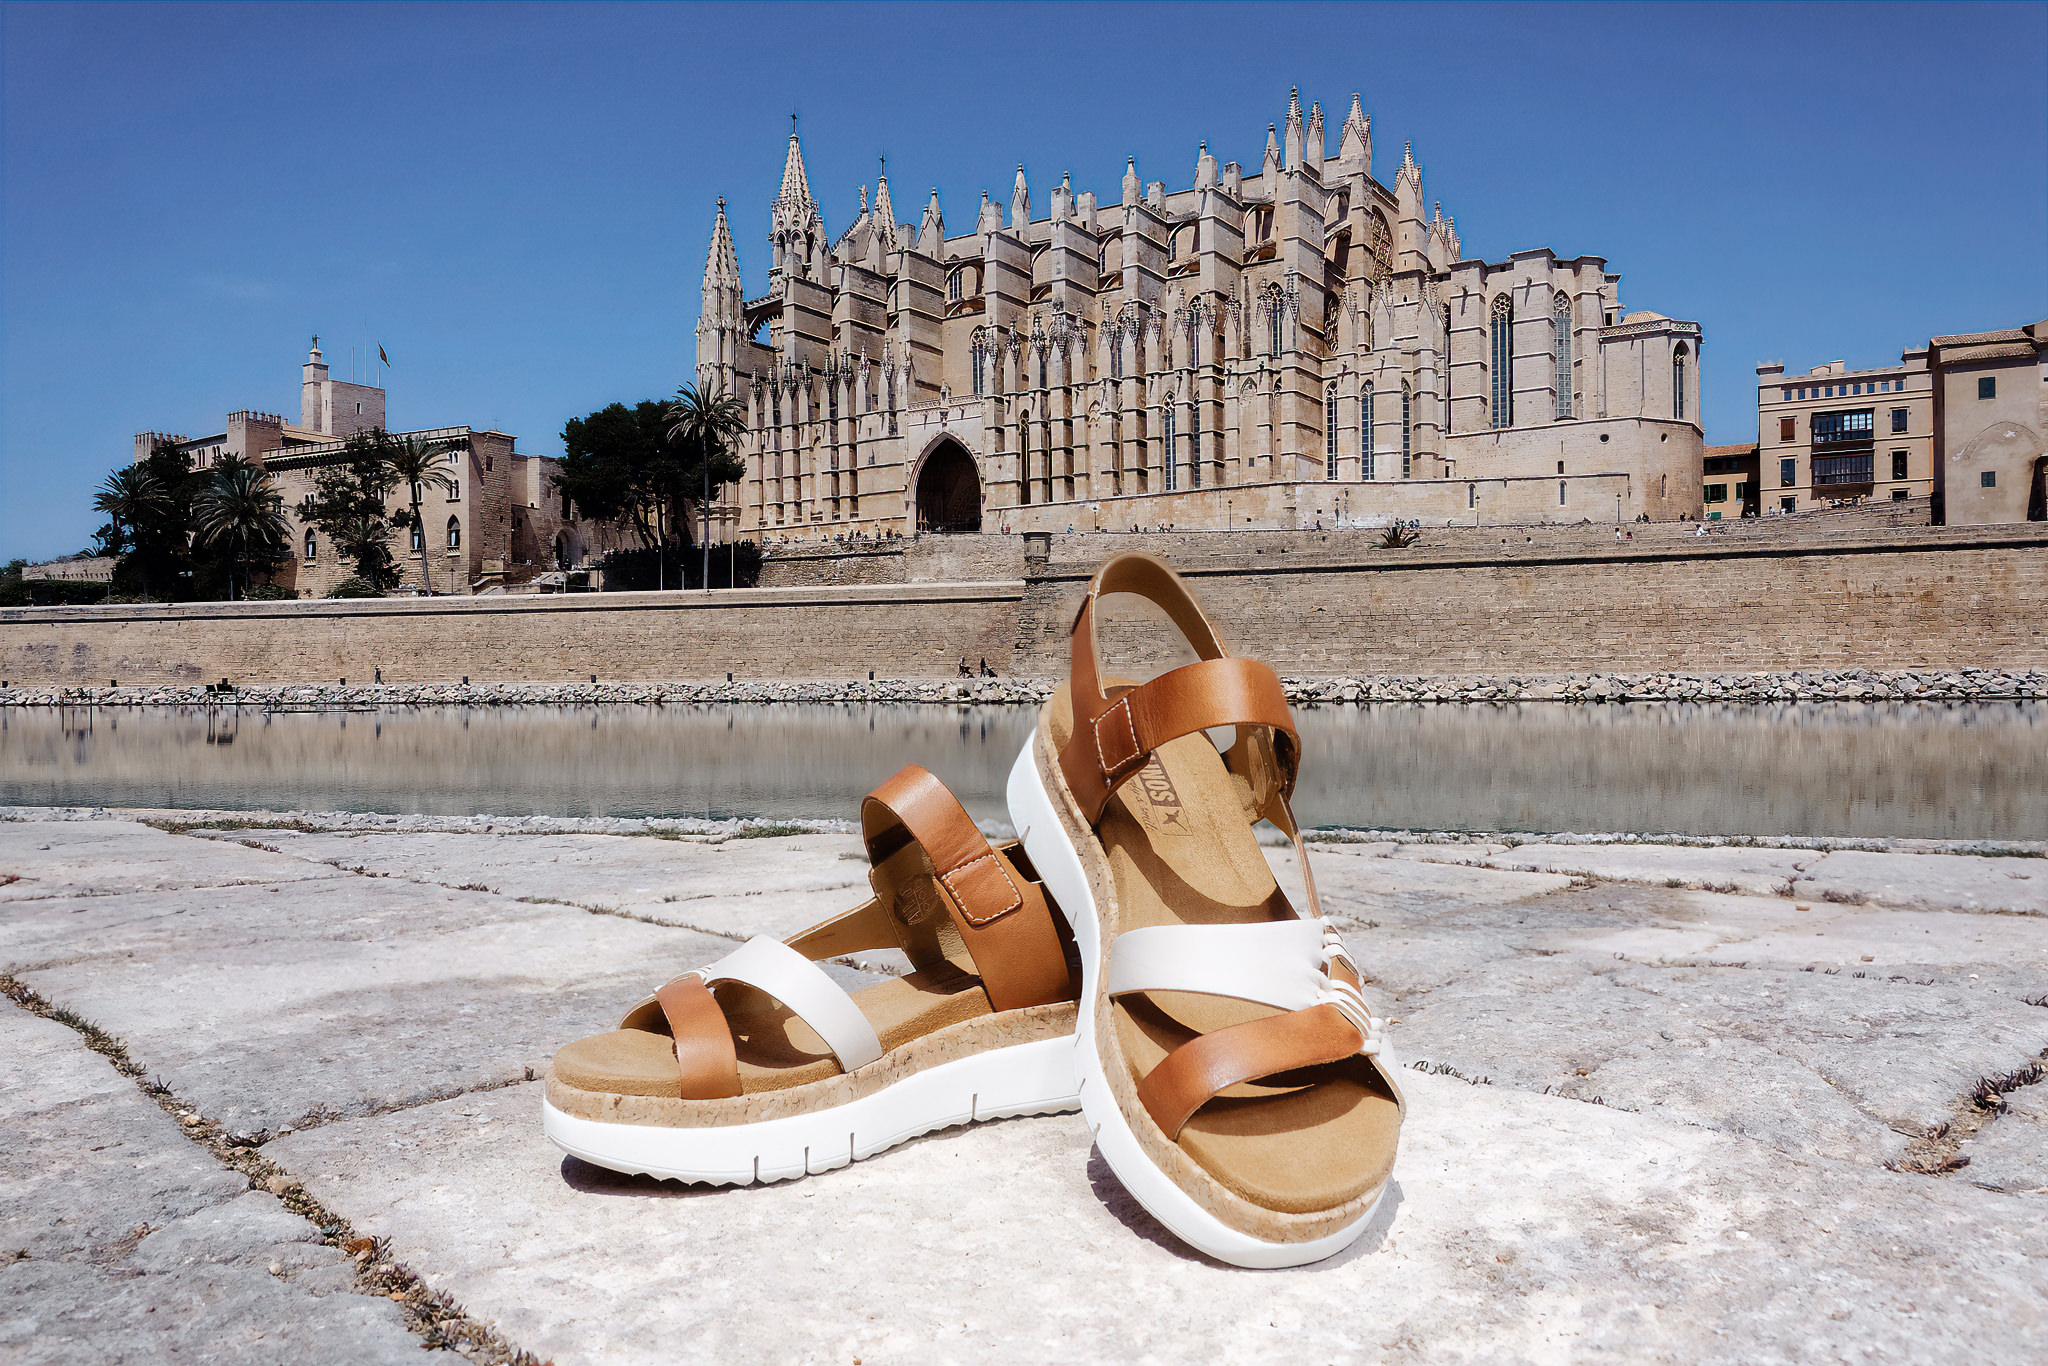 Photograph of a pair of Pikolinos women's sandals in the park by the sea with the cathedral in the background